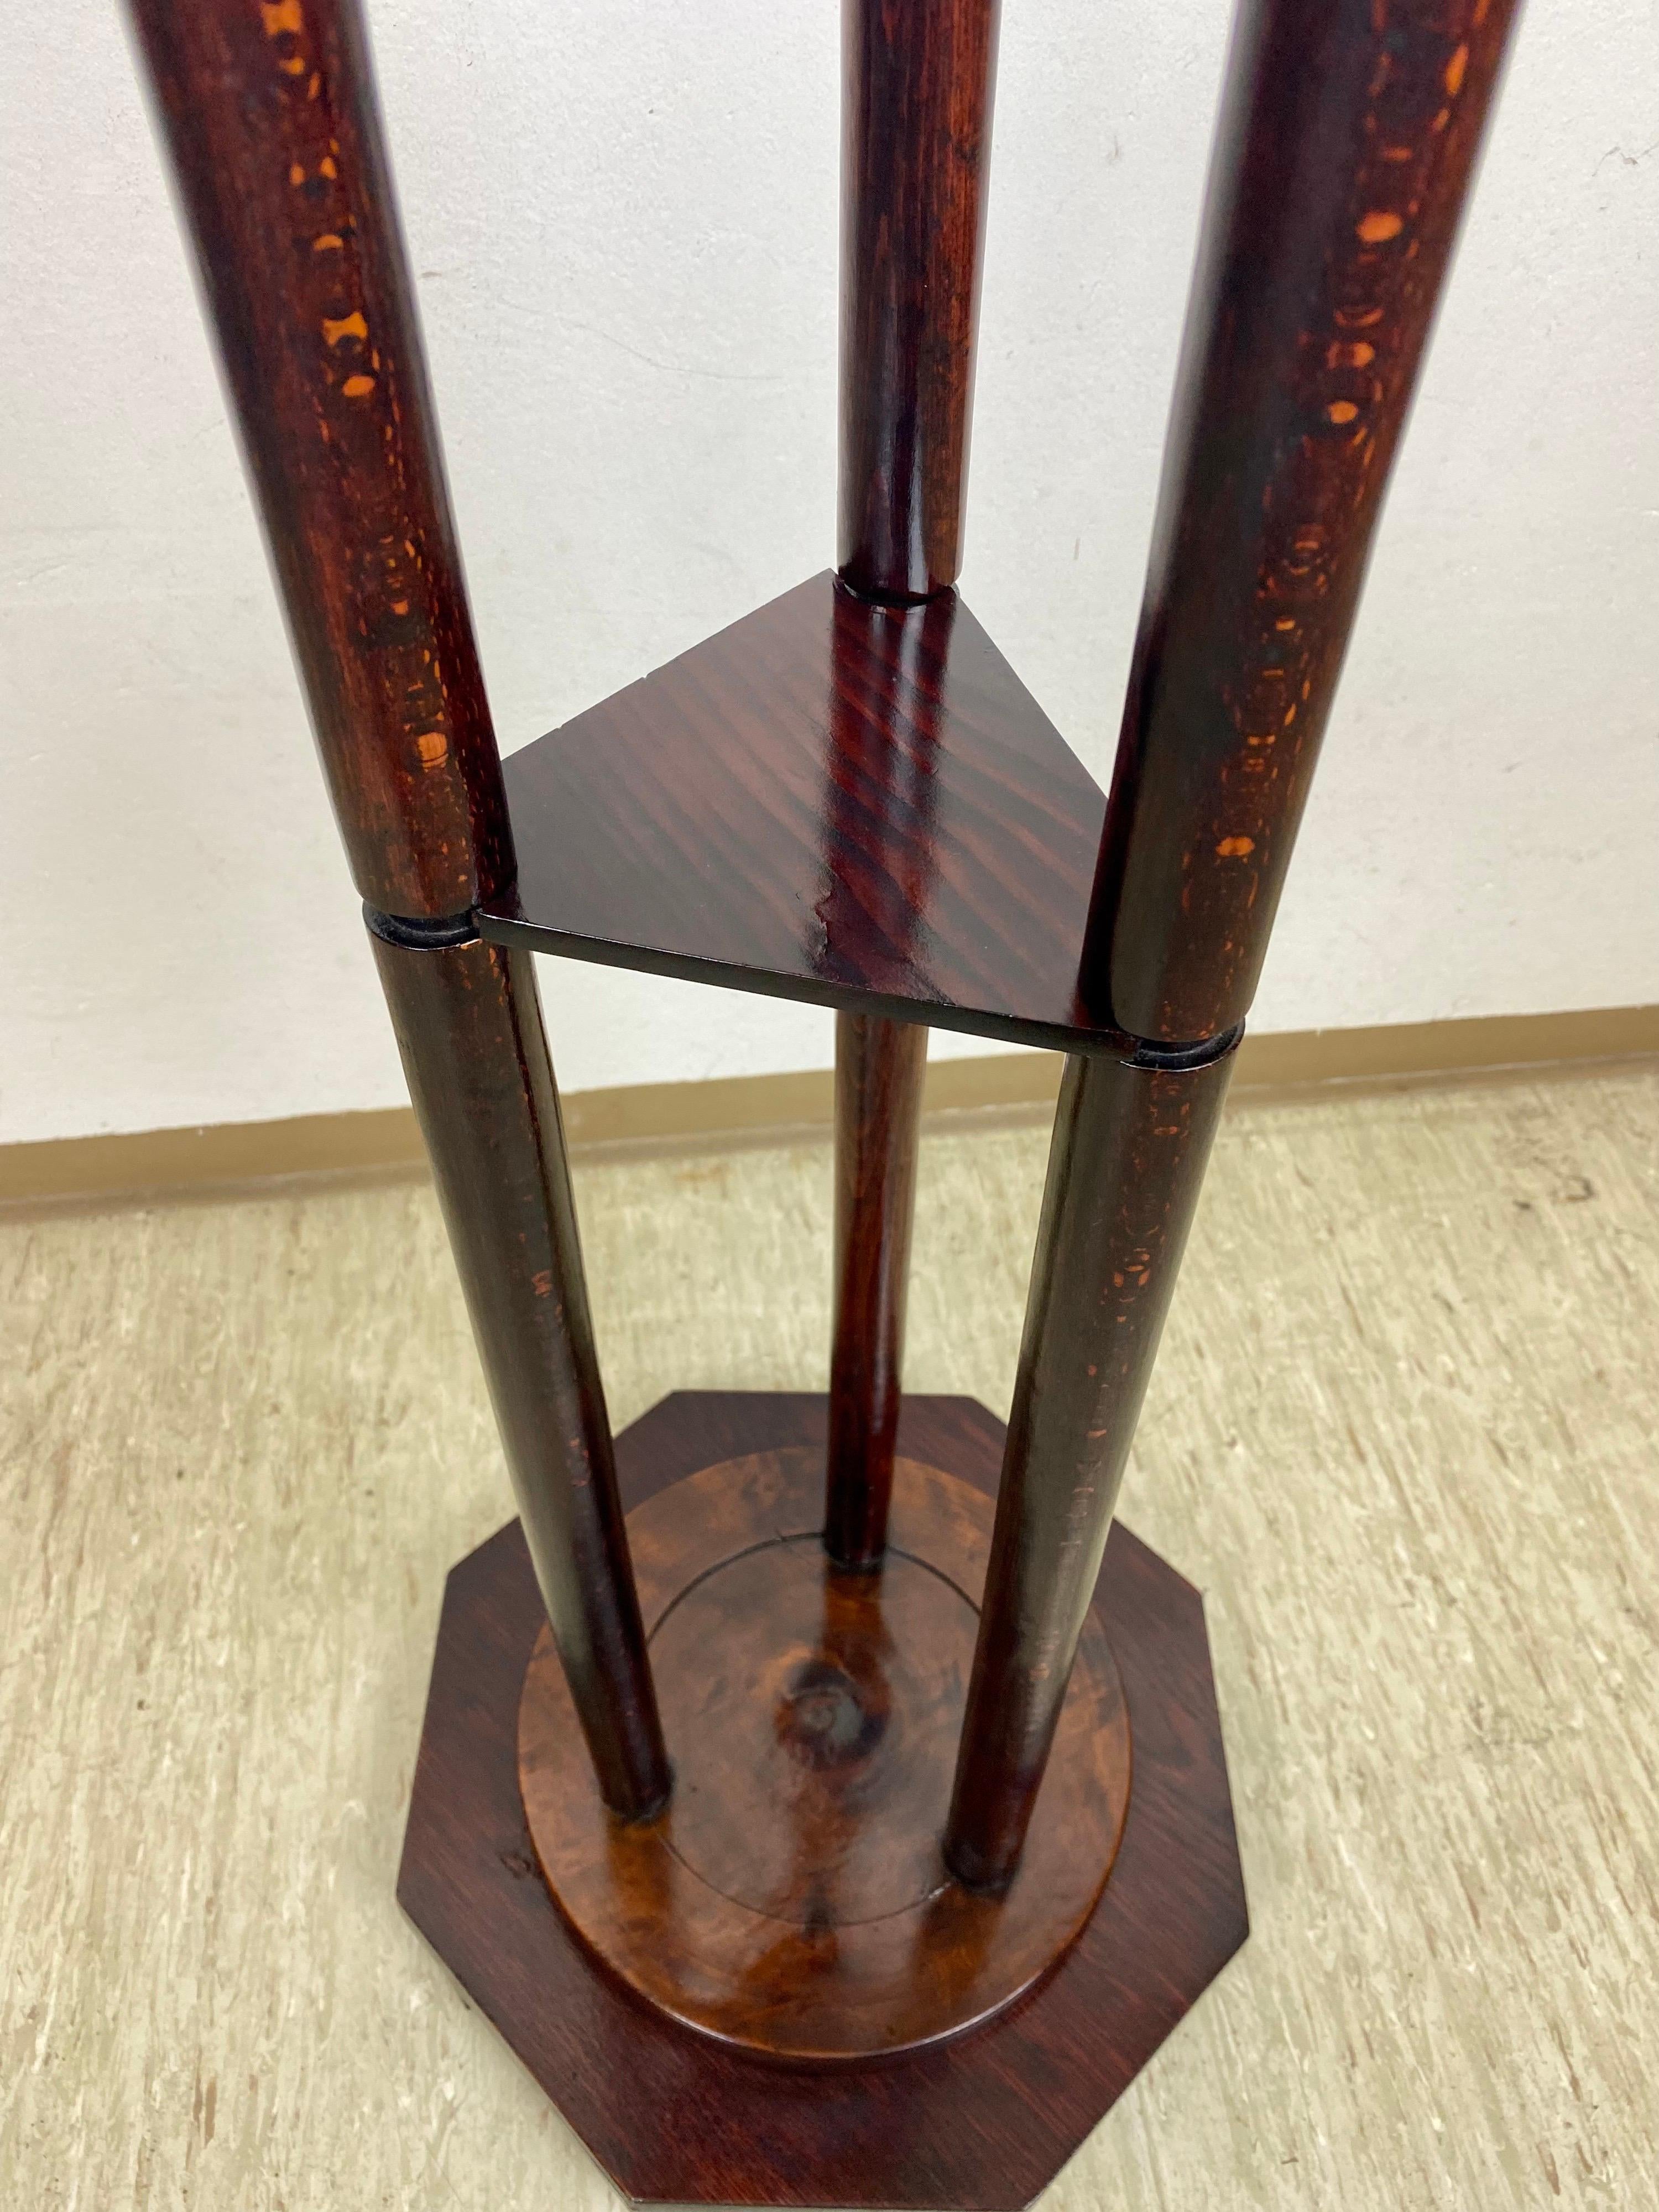 Lovely Art Nouveau Bentwood Pedestal from the period in Austria around 1900. Beautifully made of bentwood, this unique pedestal impresses with three slim columns on an octagon base. In the middle floats a small triangular compartment. The whole